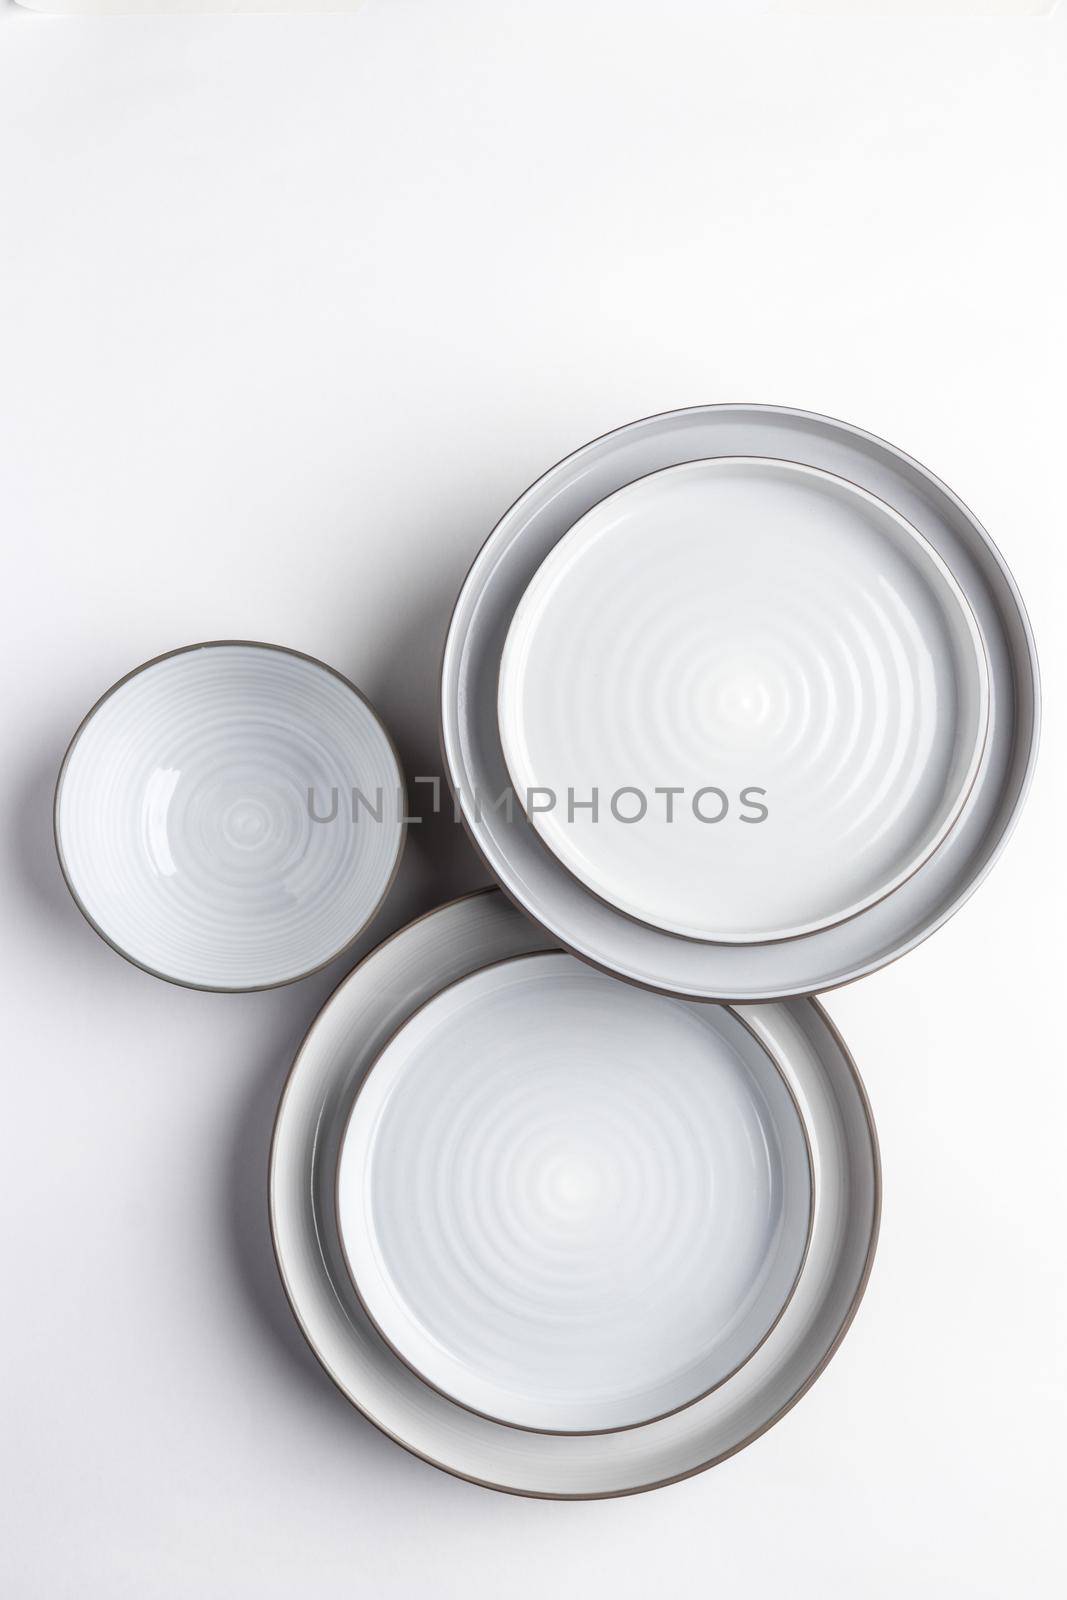 Kitchen and restaurant utensils on a white background. Top view